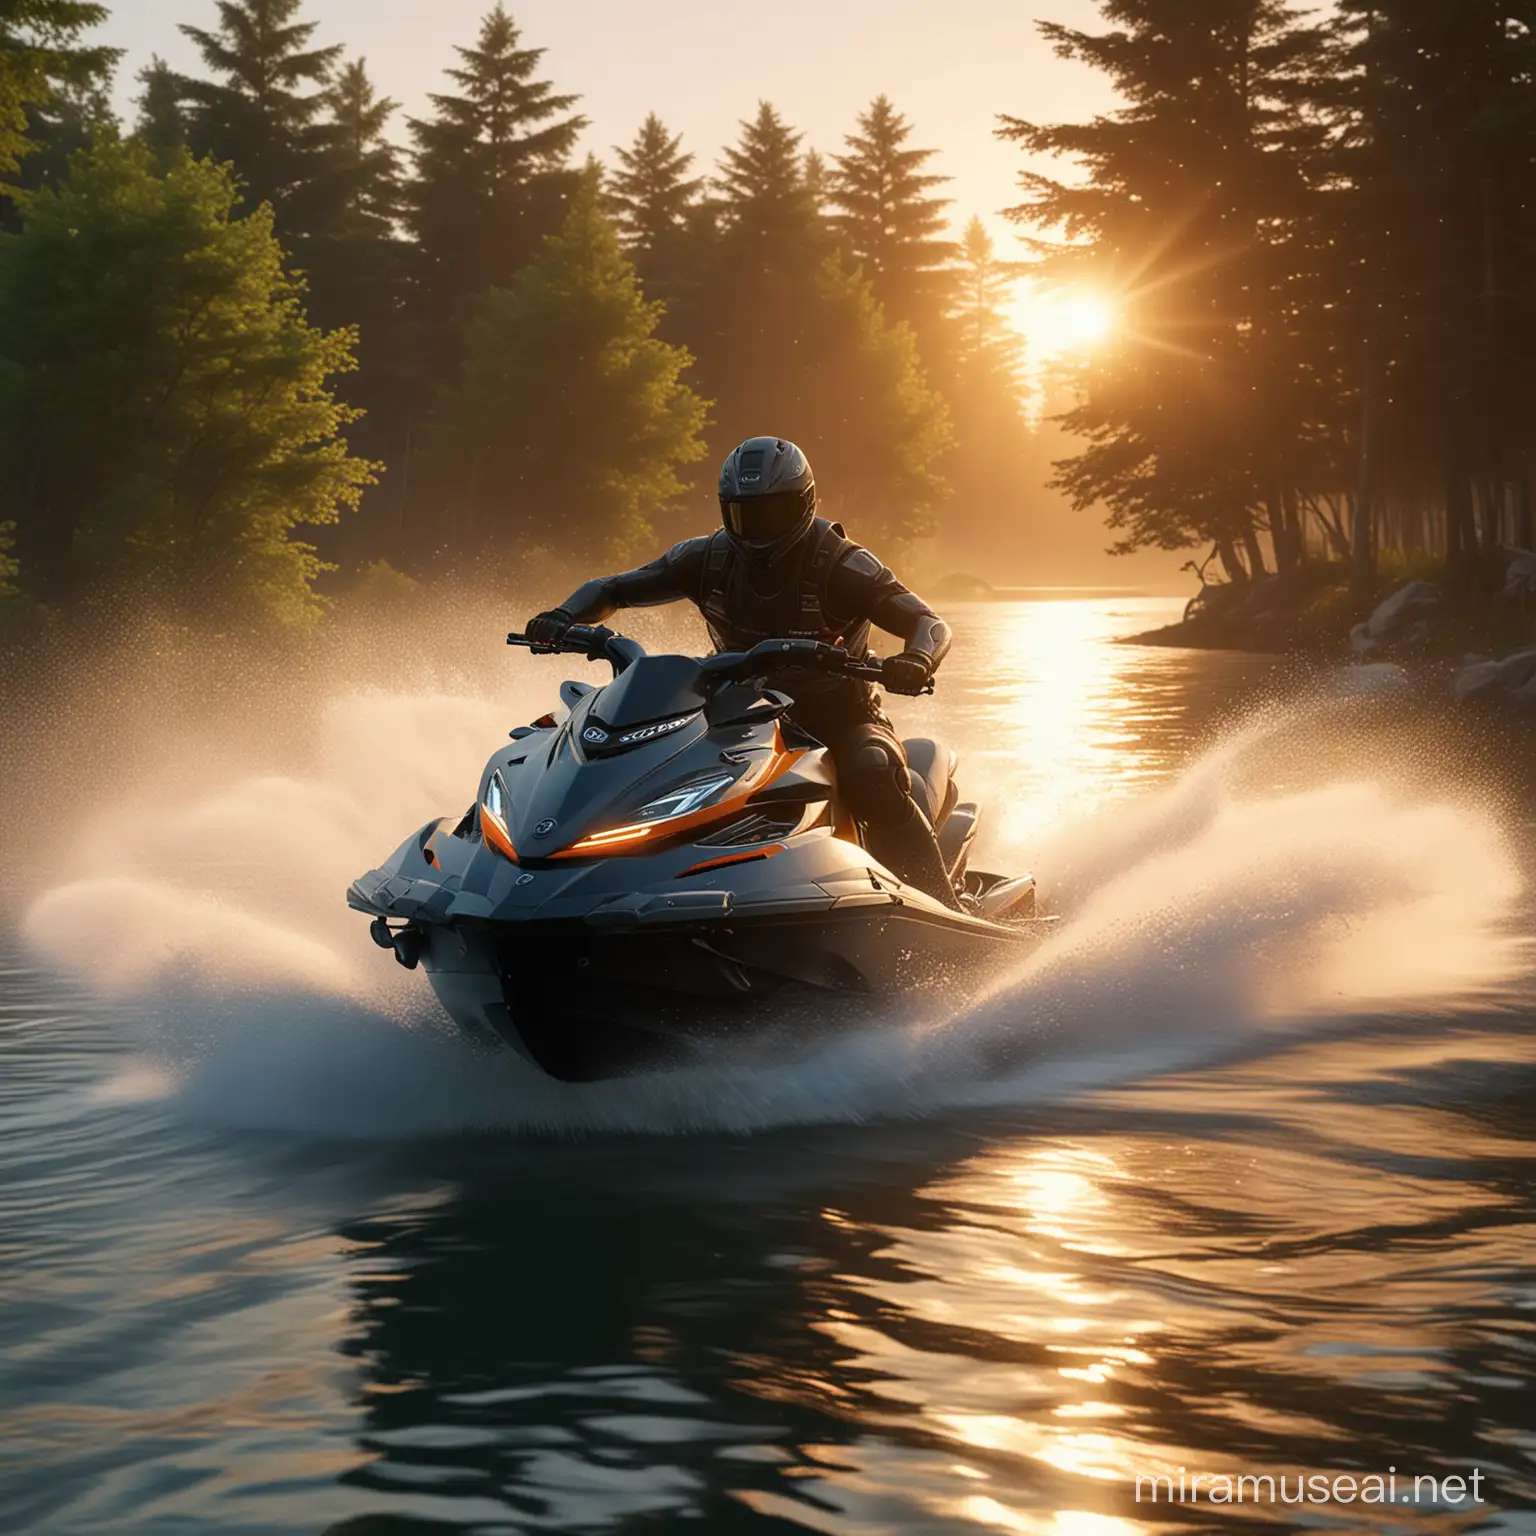 ultra realistic jetski, riding on water, with trees on the sides, a sunset and cinematic lighting 